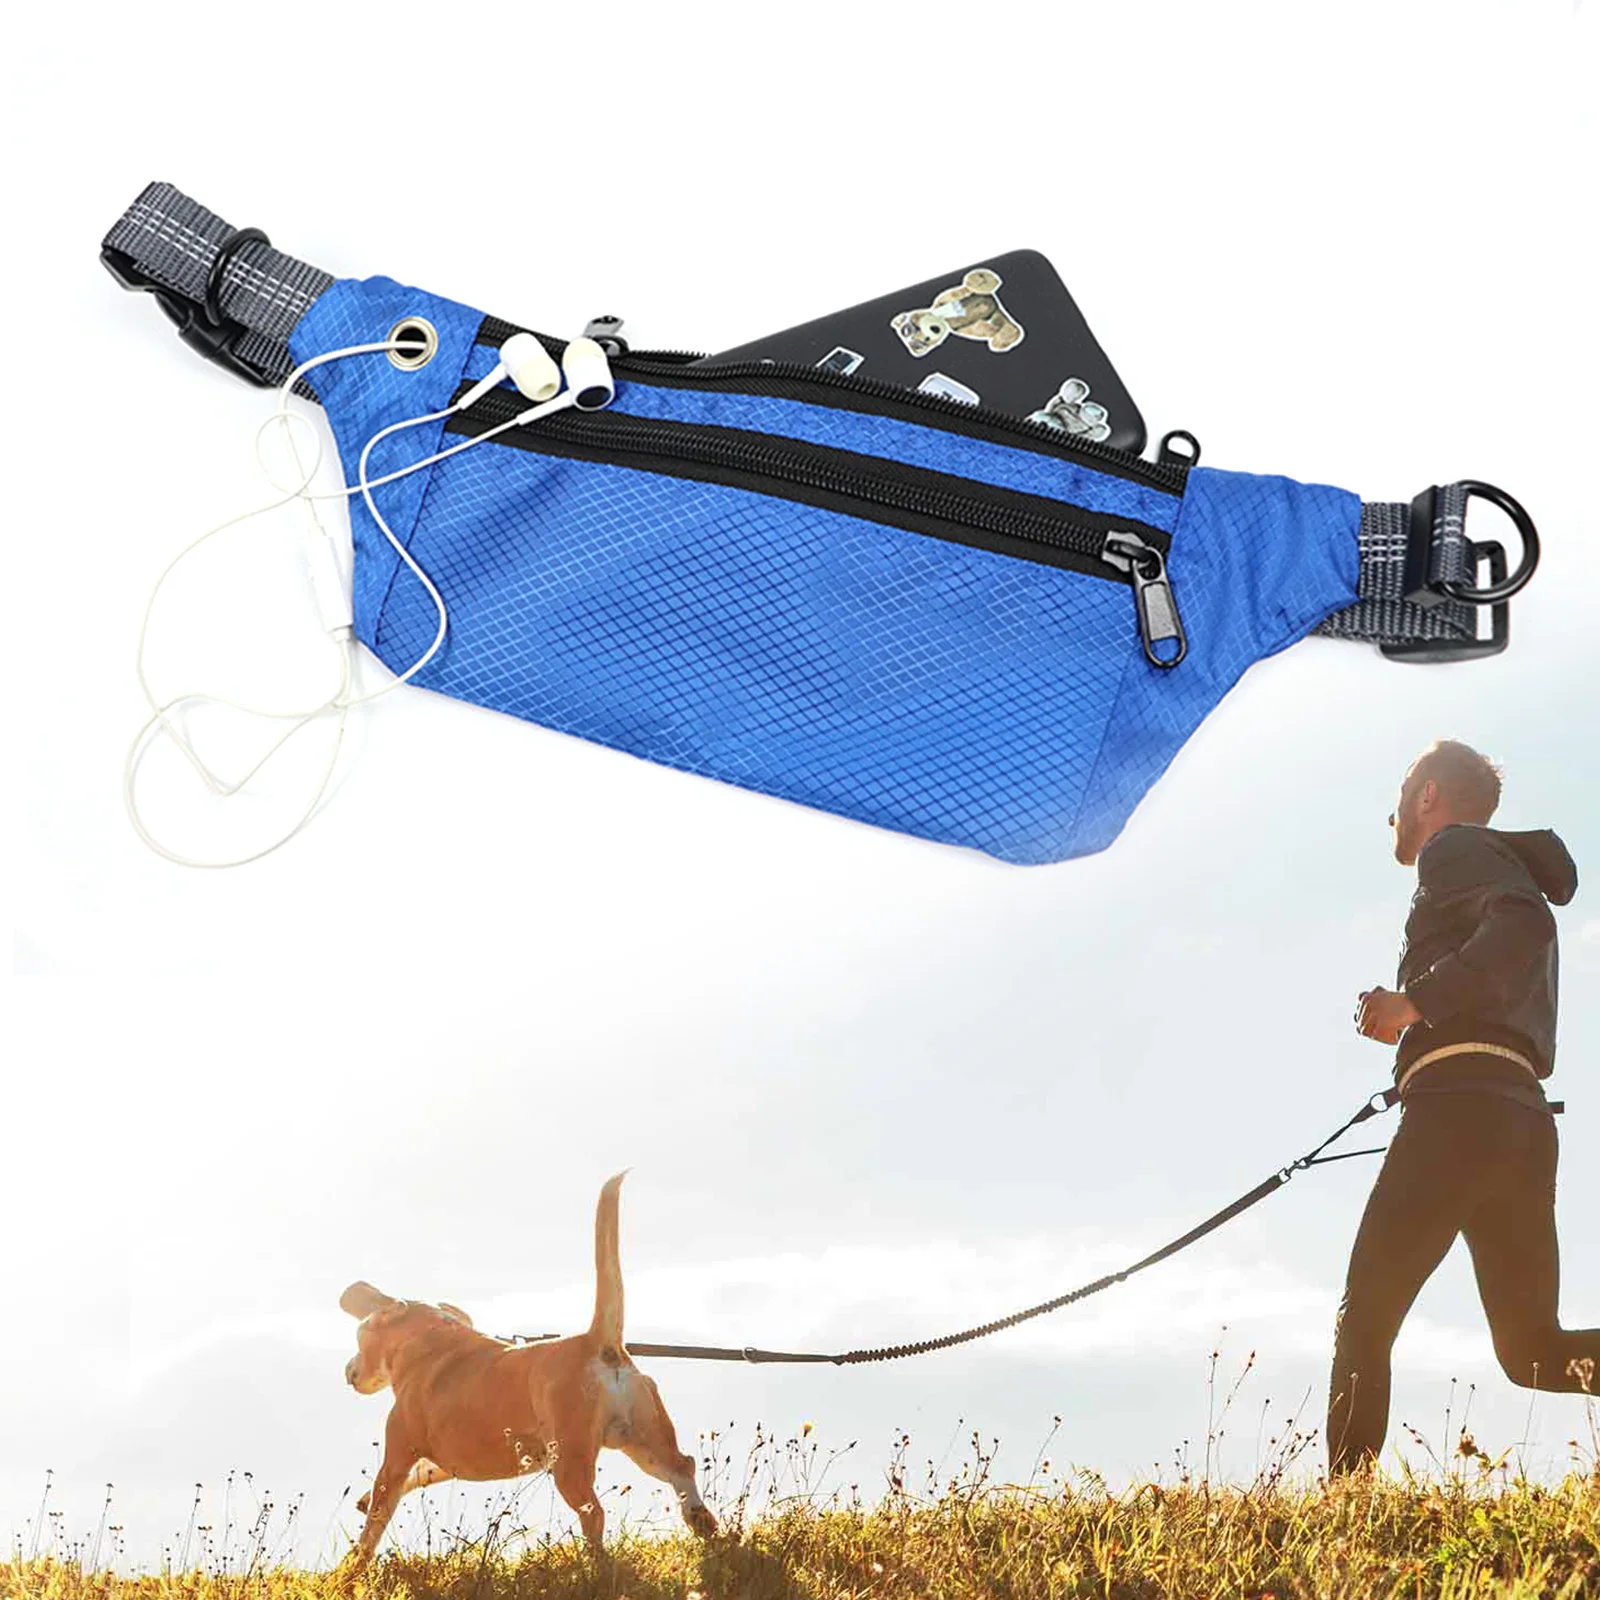 

Running Dog Leash Nylon Hand Freely Pet Products Dogs Harness Collar Jogging Lead Adjustable Waist Leashes Traction Belt Rope